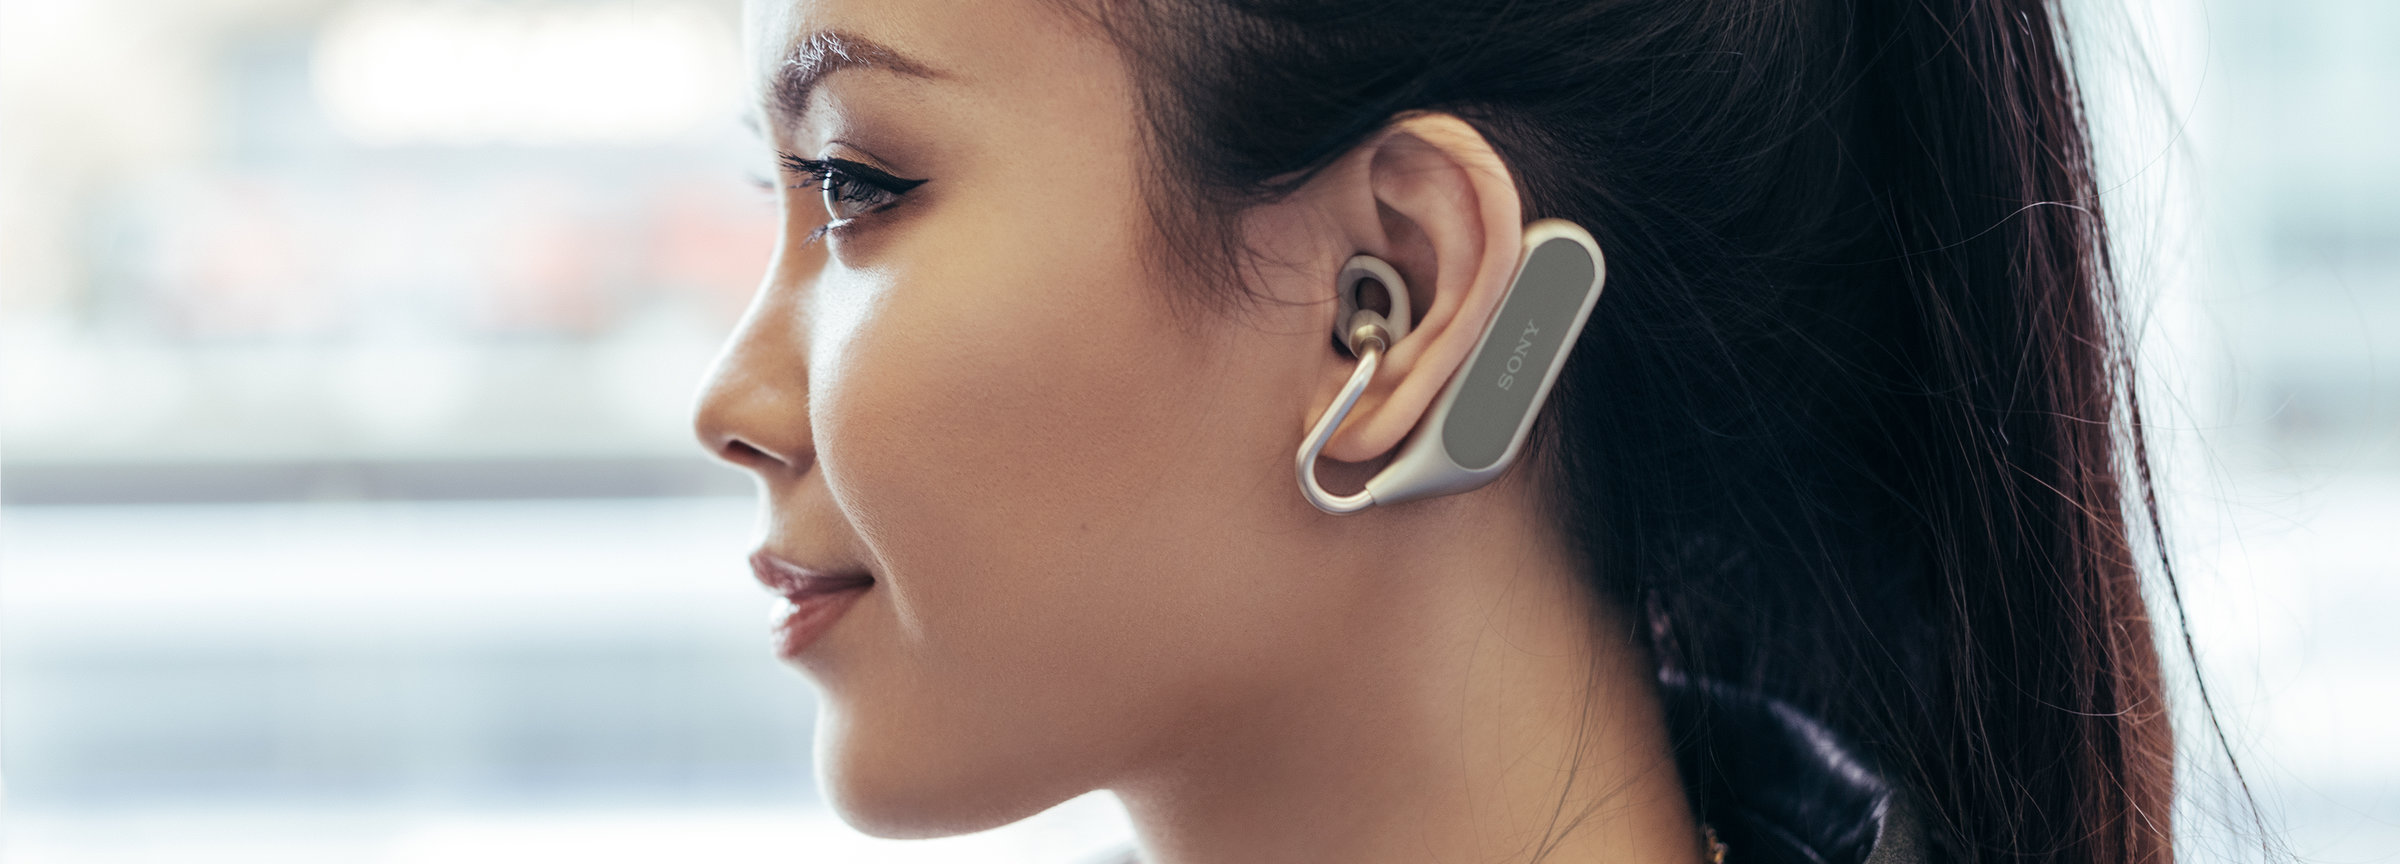 Xperia Ear Open-Style Concept. Фото - Sony